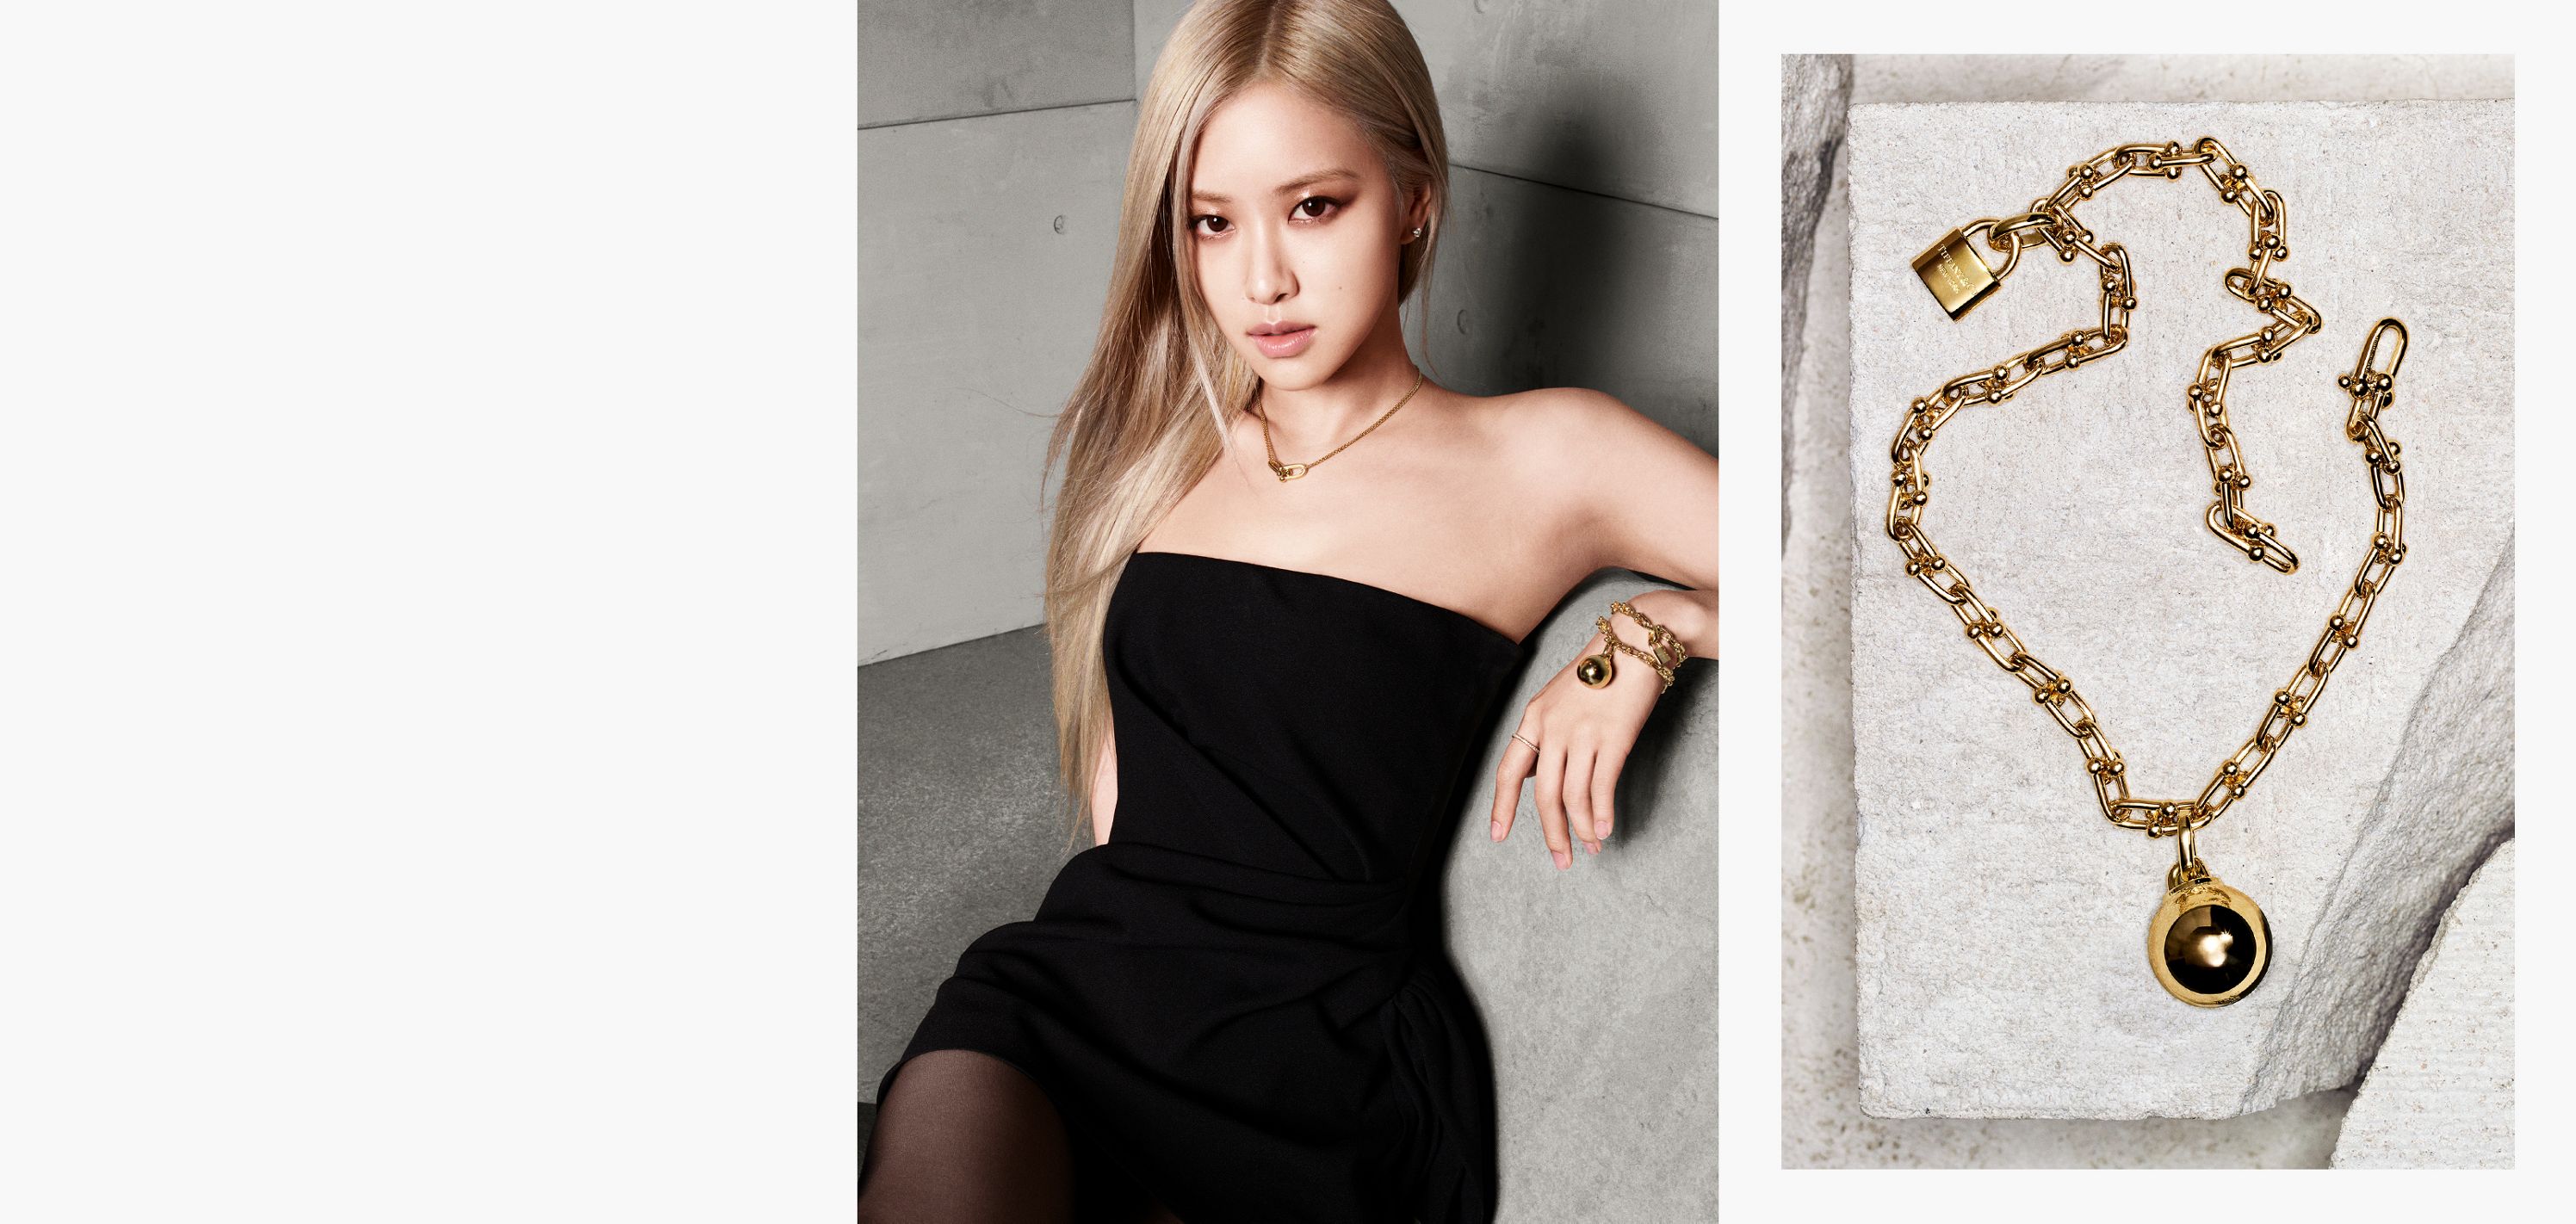 Exclusive! 7 Questions With Blackpink's Rosé, Tiffany & Co's